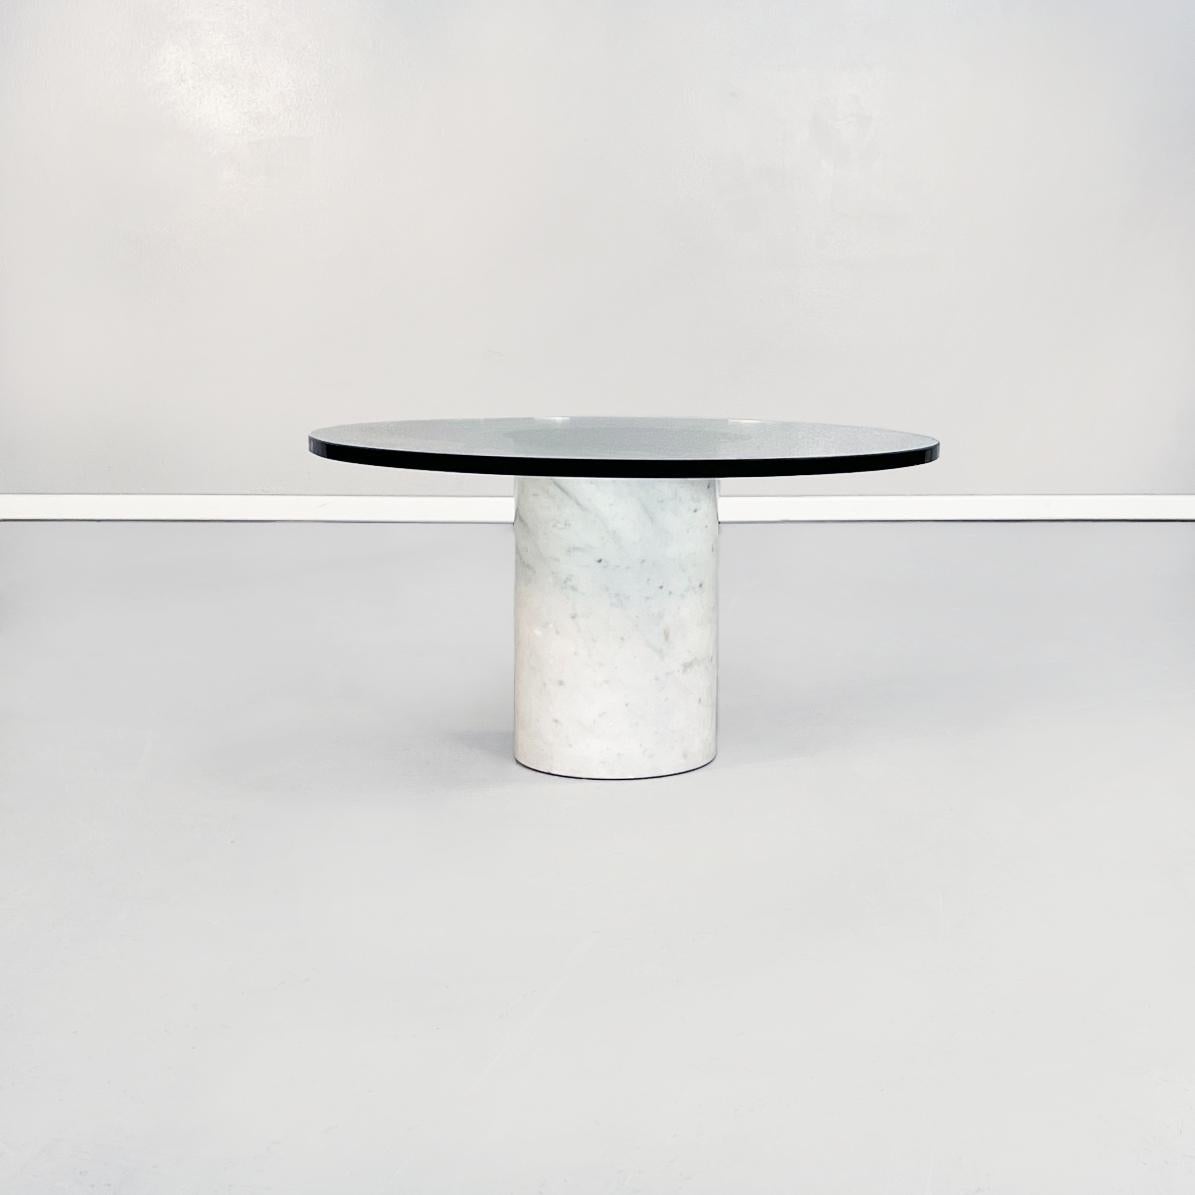 Italian mid-century round coffee table in aquamarine glass and white marble, 1980s
Round glass coffee table with cylindrical marble base. The round piano in thick aquamarine glass has in the center a round mirror. The cylindrical base is in white